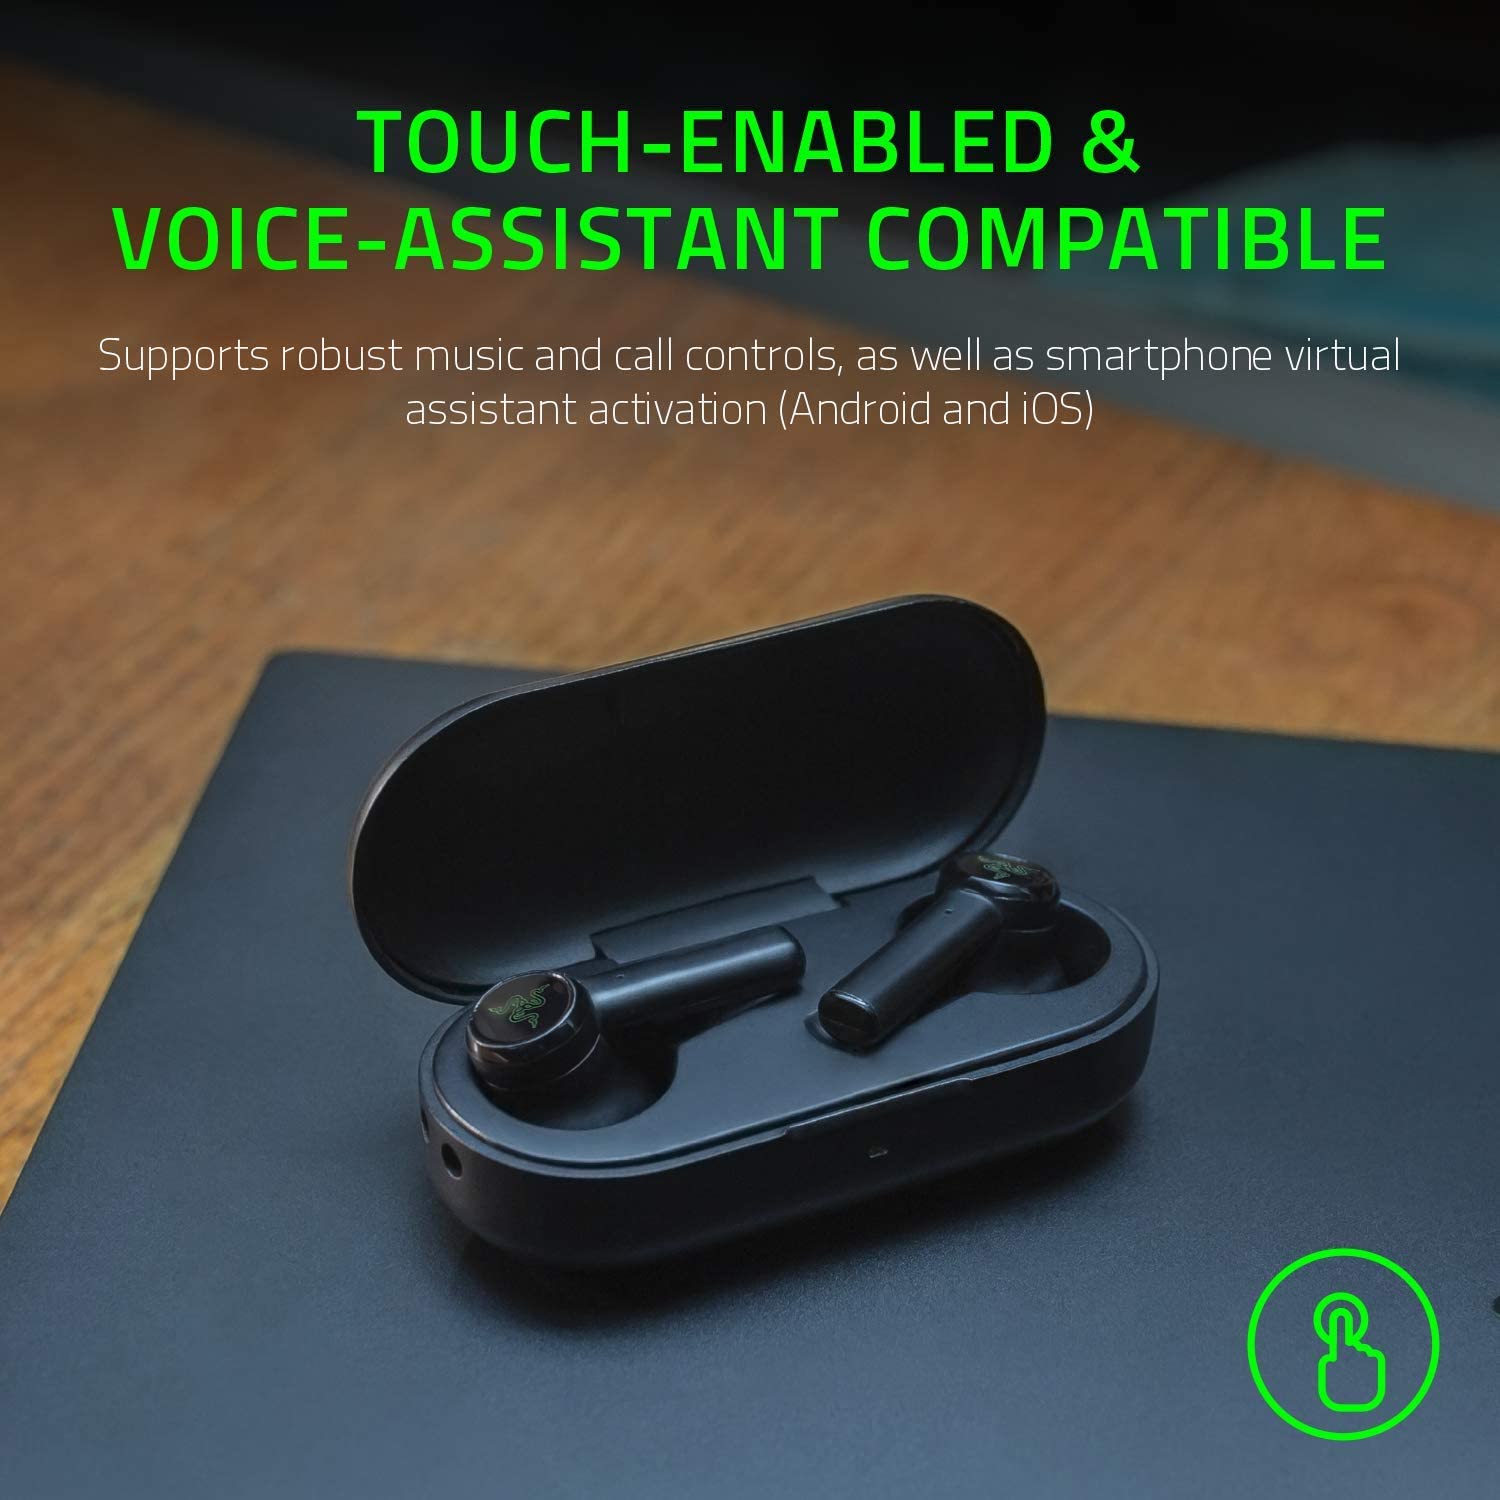 THX and ANC make the Razer Hammerhead True Wireless Pro the best gaming earbuds